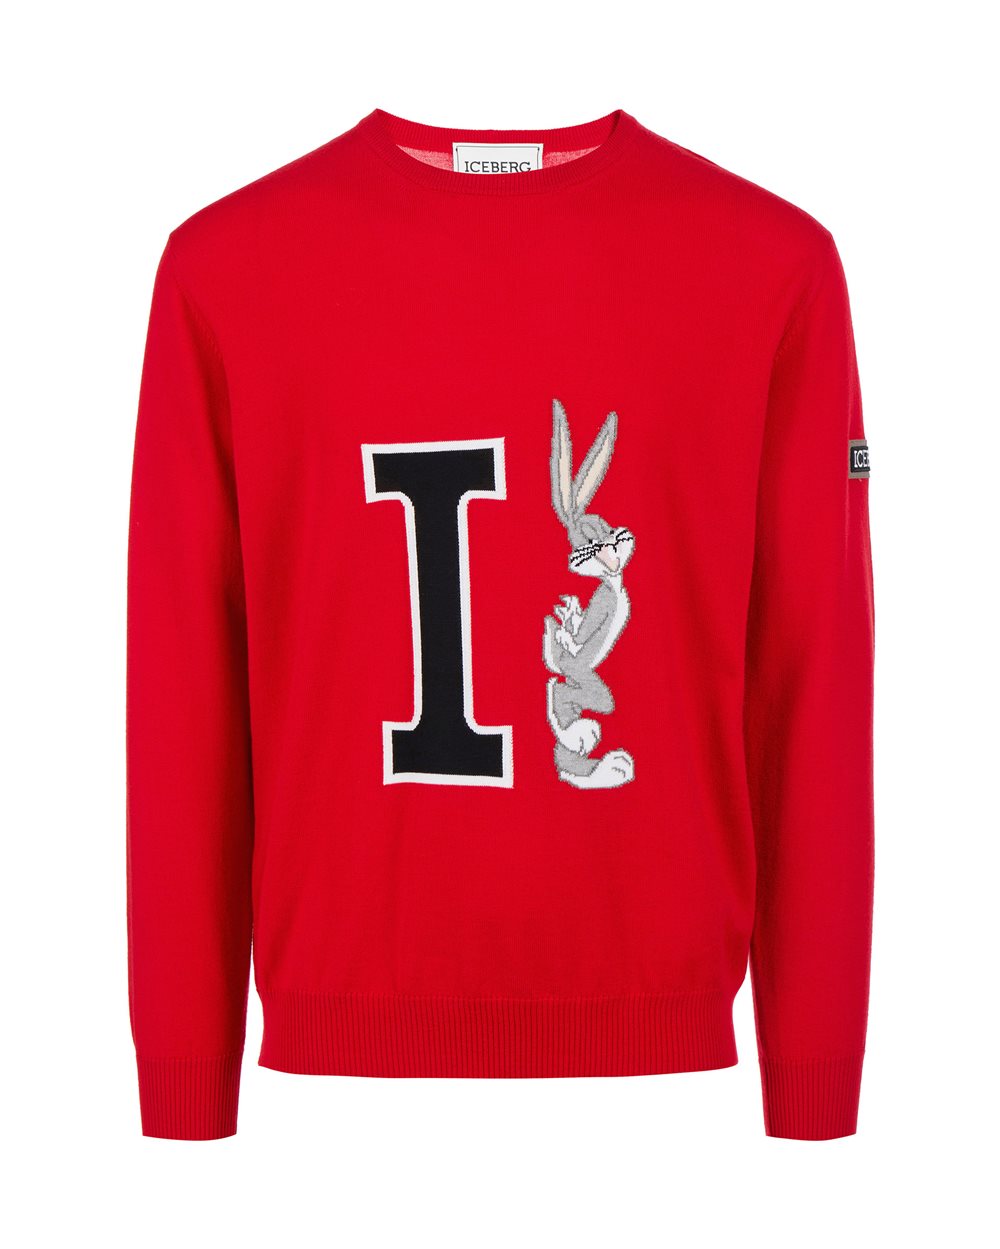 Red sweater with cartoon detail - Looney Tunes selection | Iceberg - Official Website